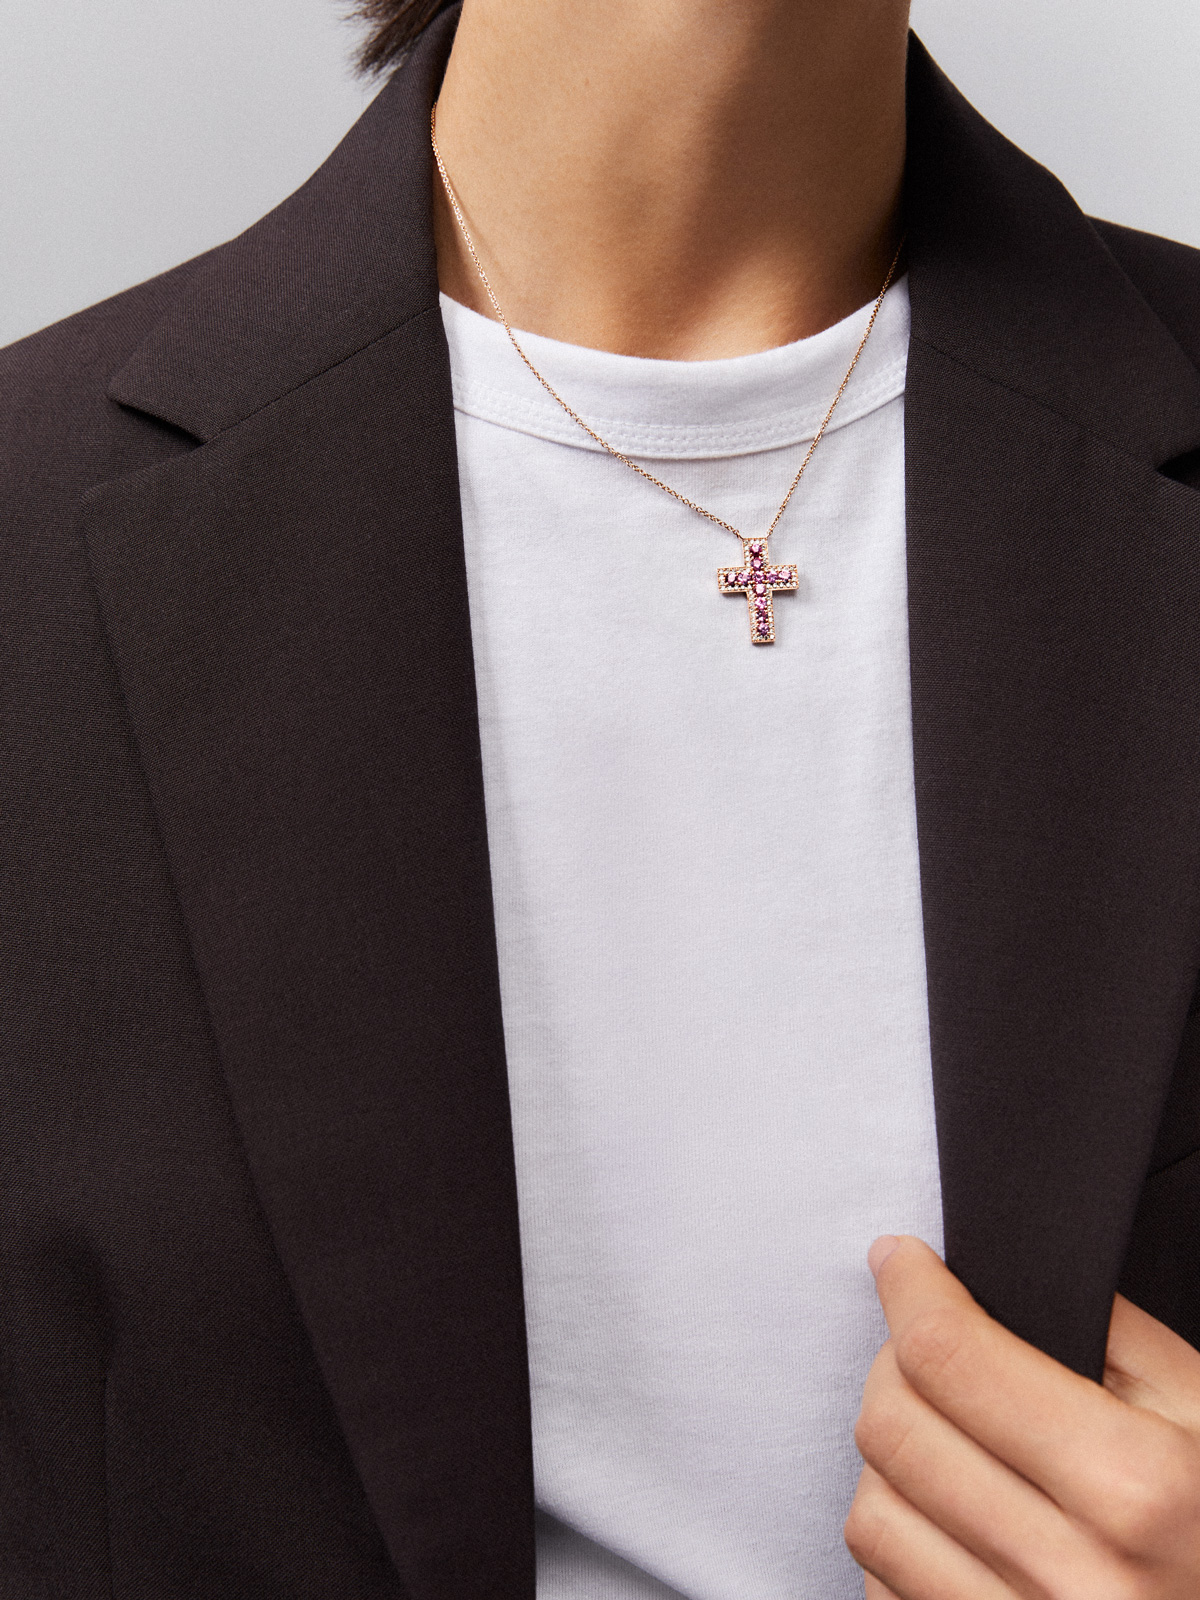 18kt rose gold cross pendant with diamonds and pink sapphires